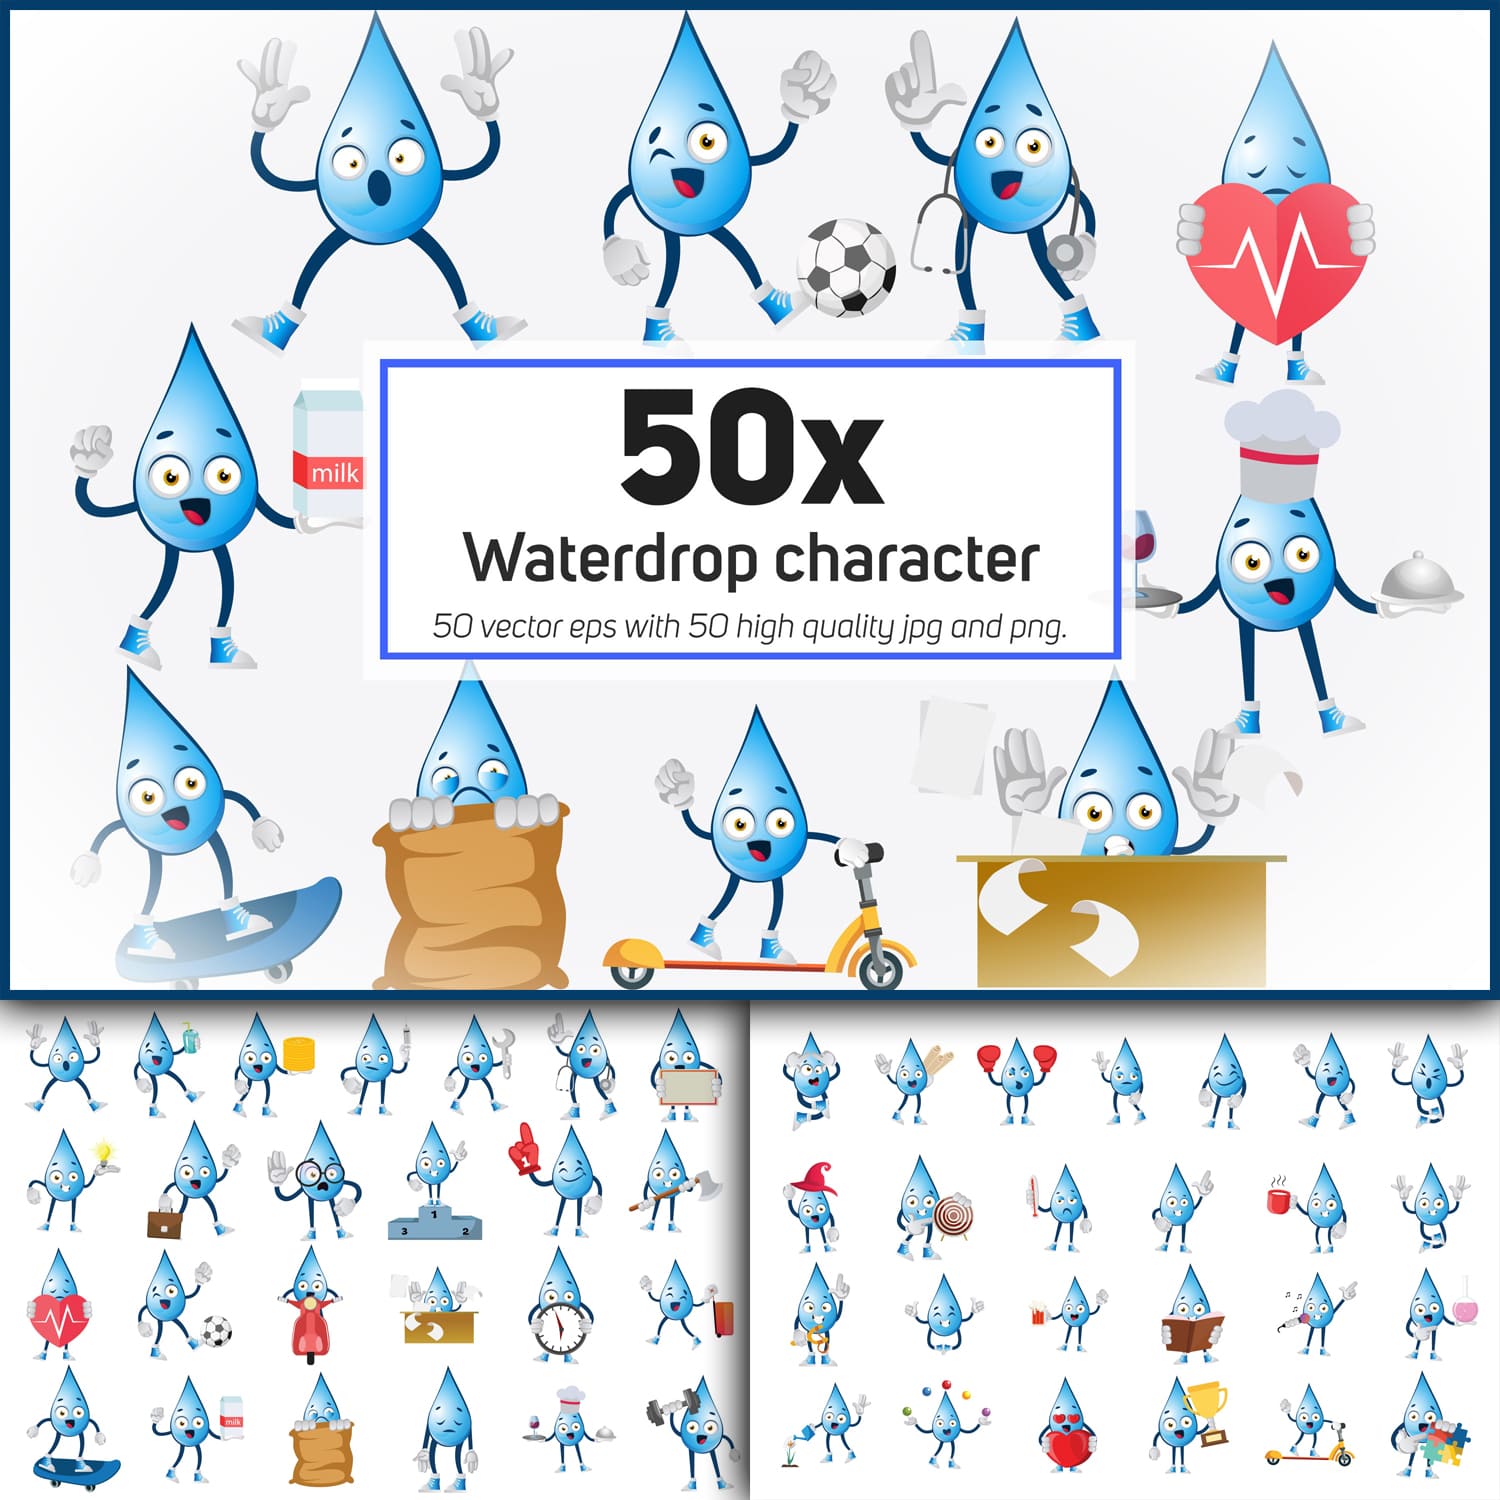 50x Waterdrop character and mascot collection illustration.